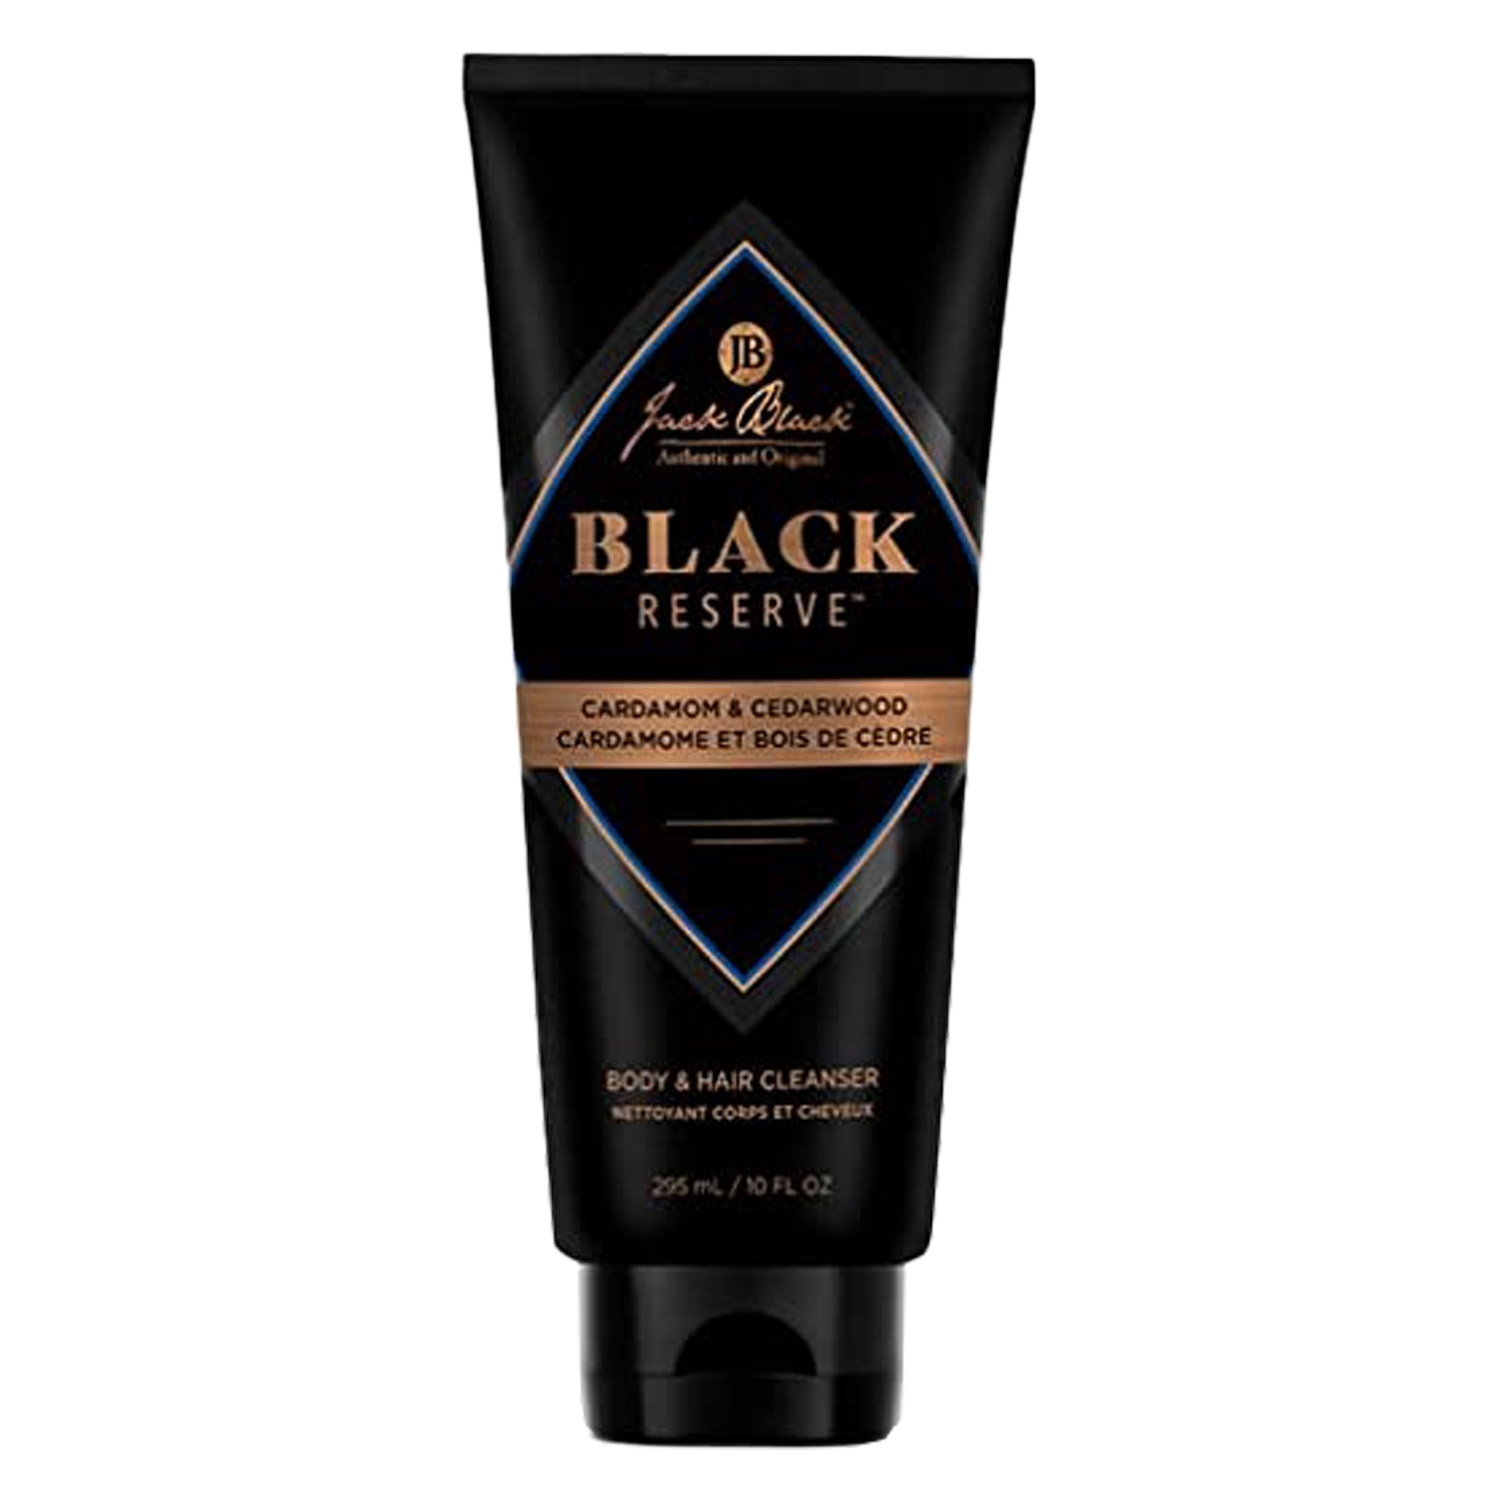 Product image from Black Reserve - Body & Hair Cleanser